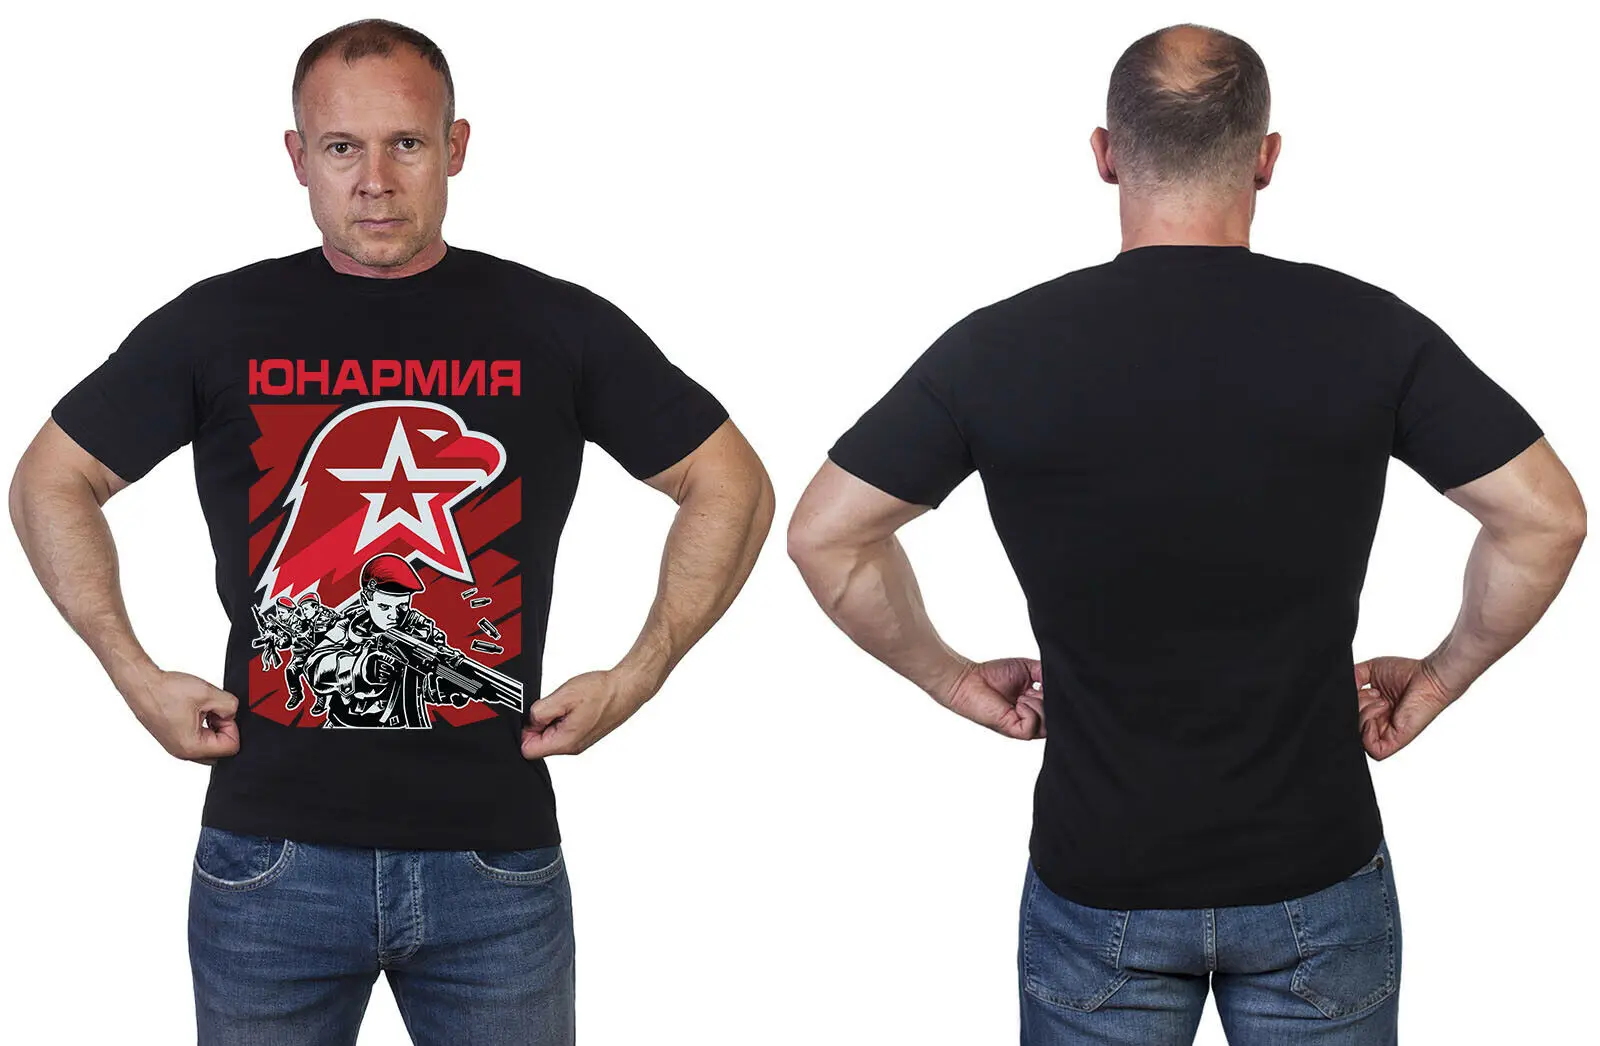 

The Young Army. Russia Special Forces T-shirt. High Quality Cotton, Loose, Big Sizes, Breathable Top, Casual T Shirt S-3XL